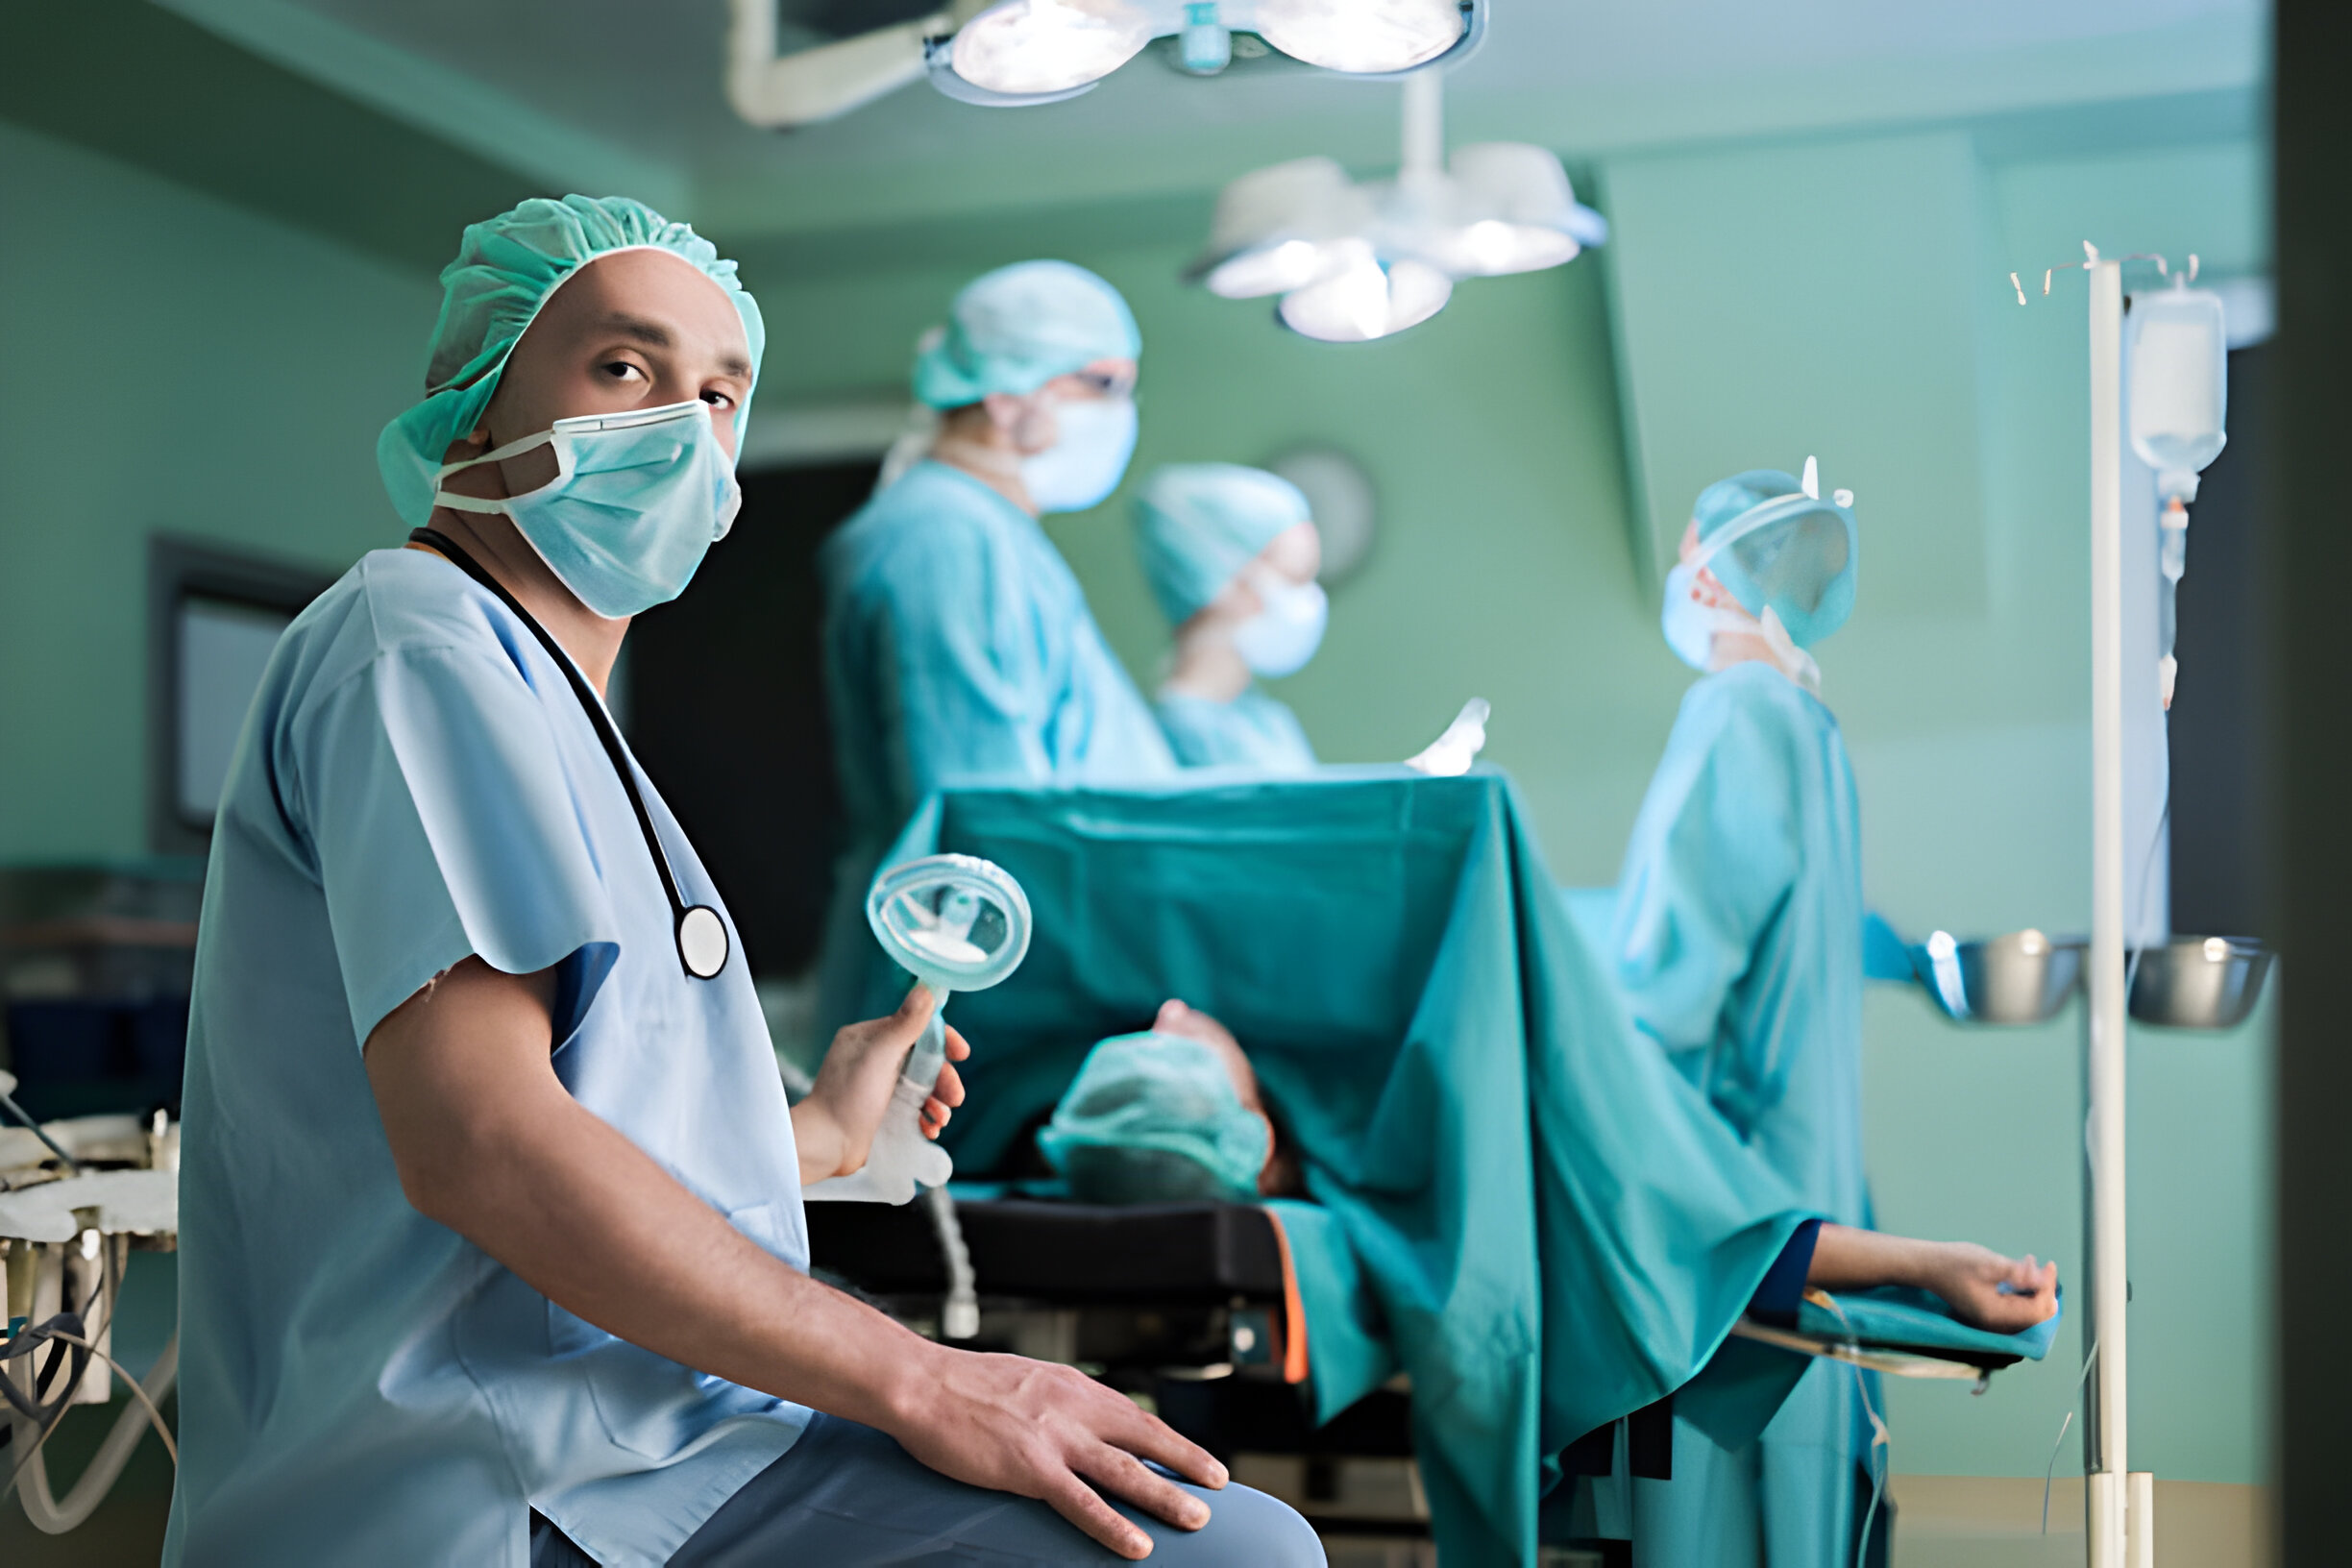 How To Become An Anesthesiologist In 6 Steps